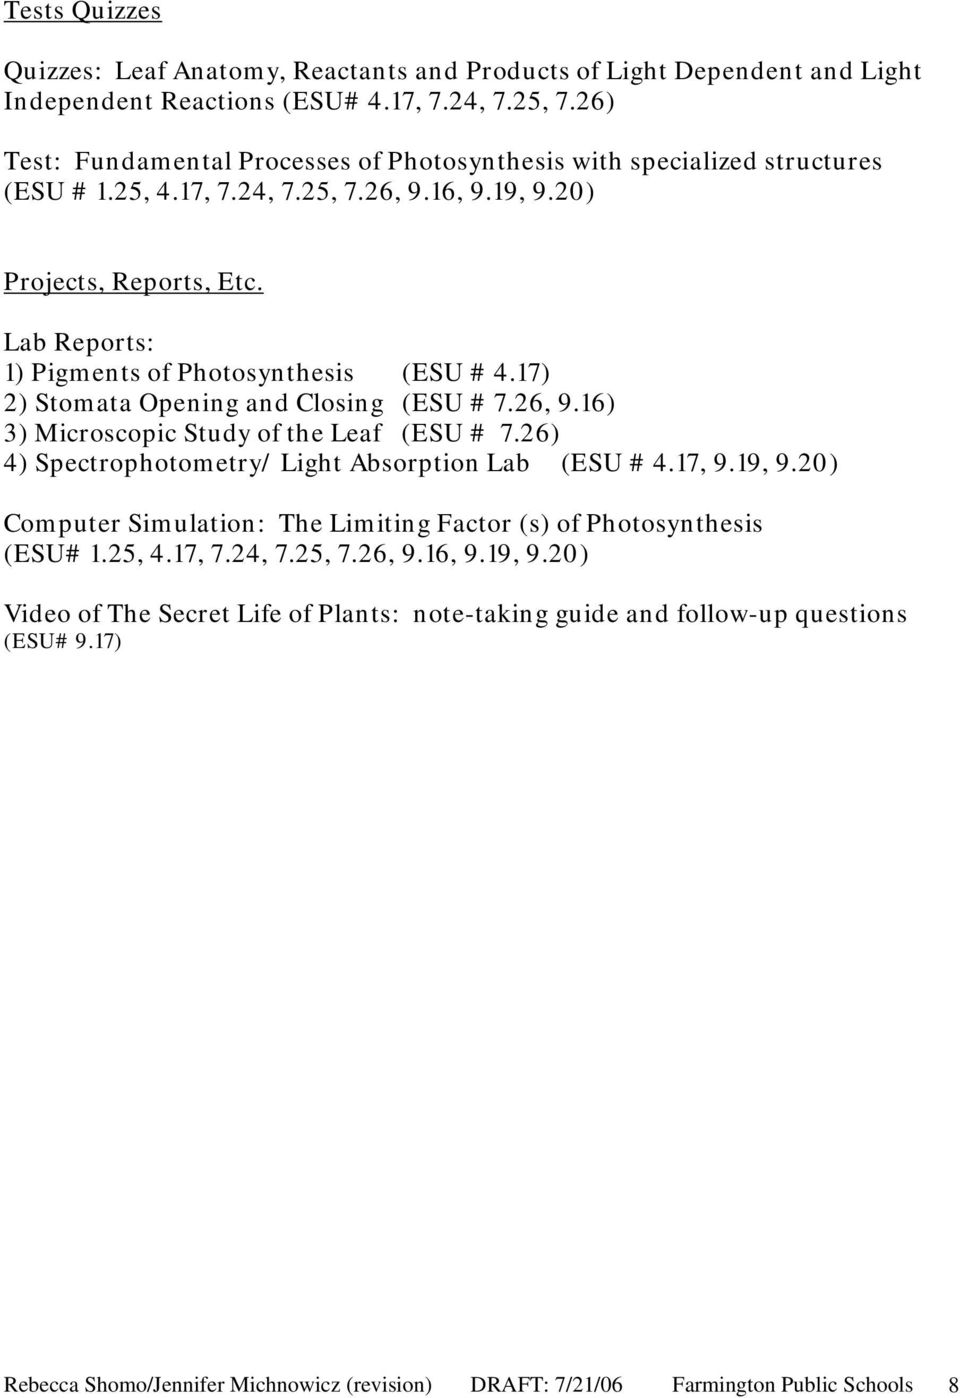 plant pigments and photosynthesis lab report